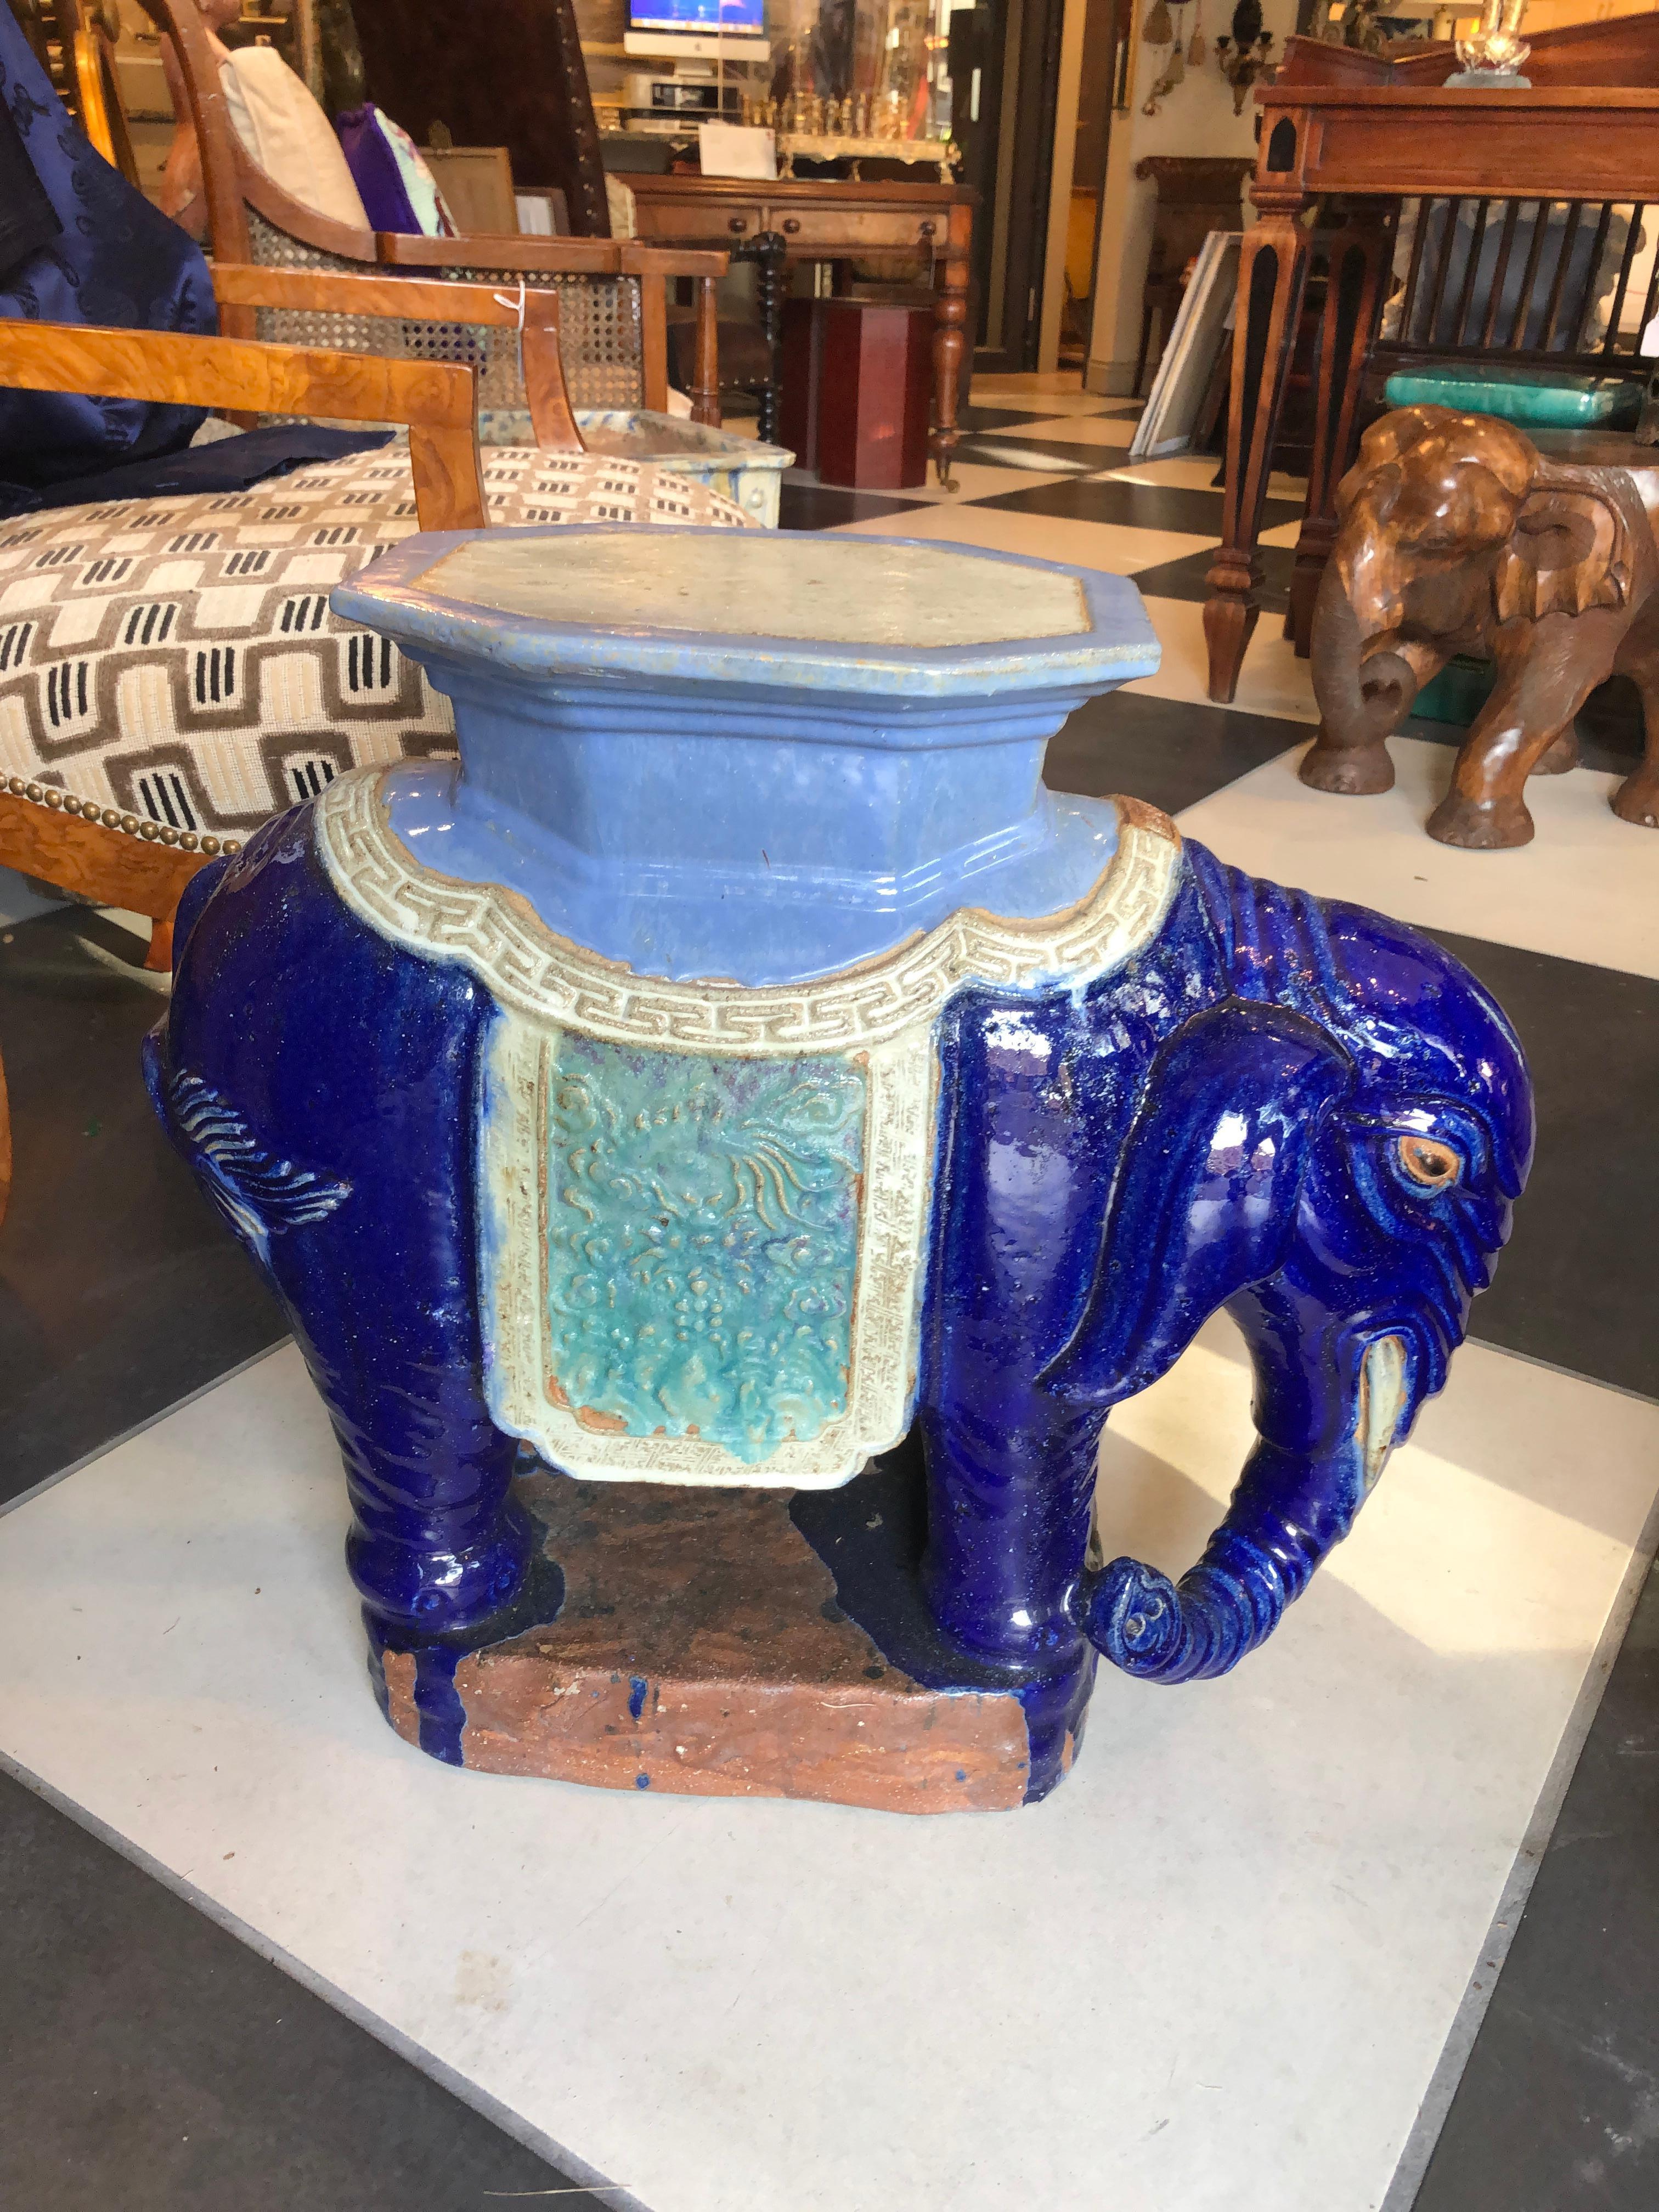 A pair of Chinese garden elephant stands/side tables hand painted in mid-night blue, leaded glaze which gives it a more luxurious look. These ceramic elephants would make a plus addition to a living room, patio or garden. Elephants are designed on